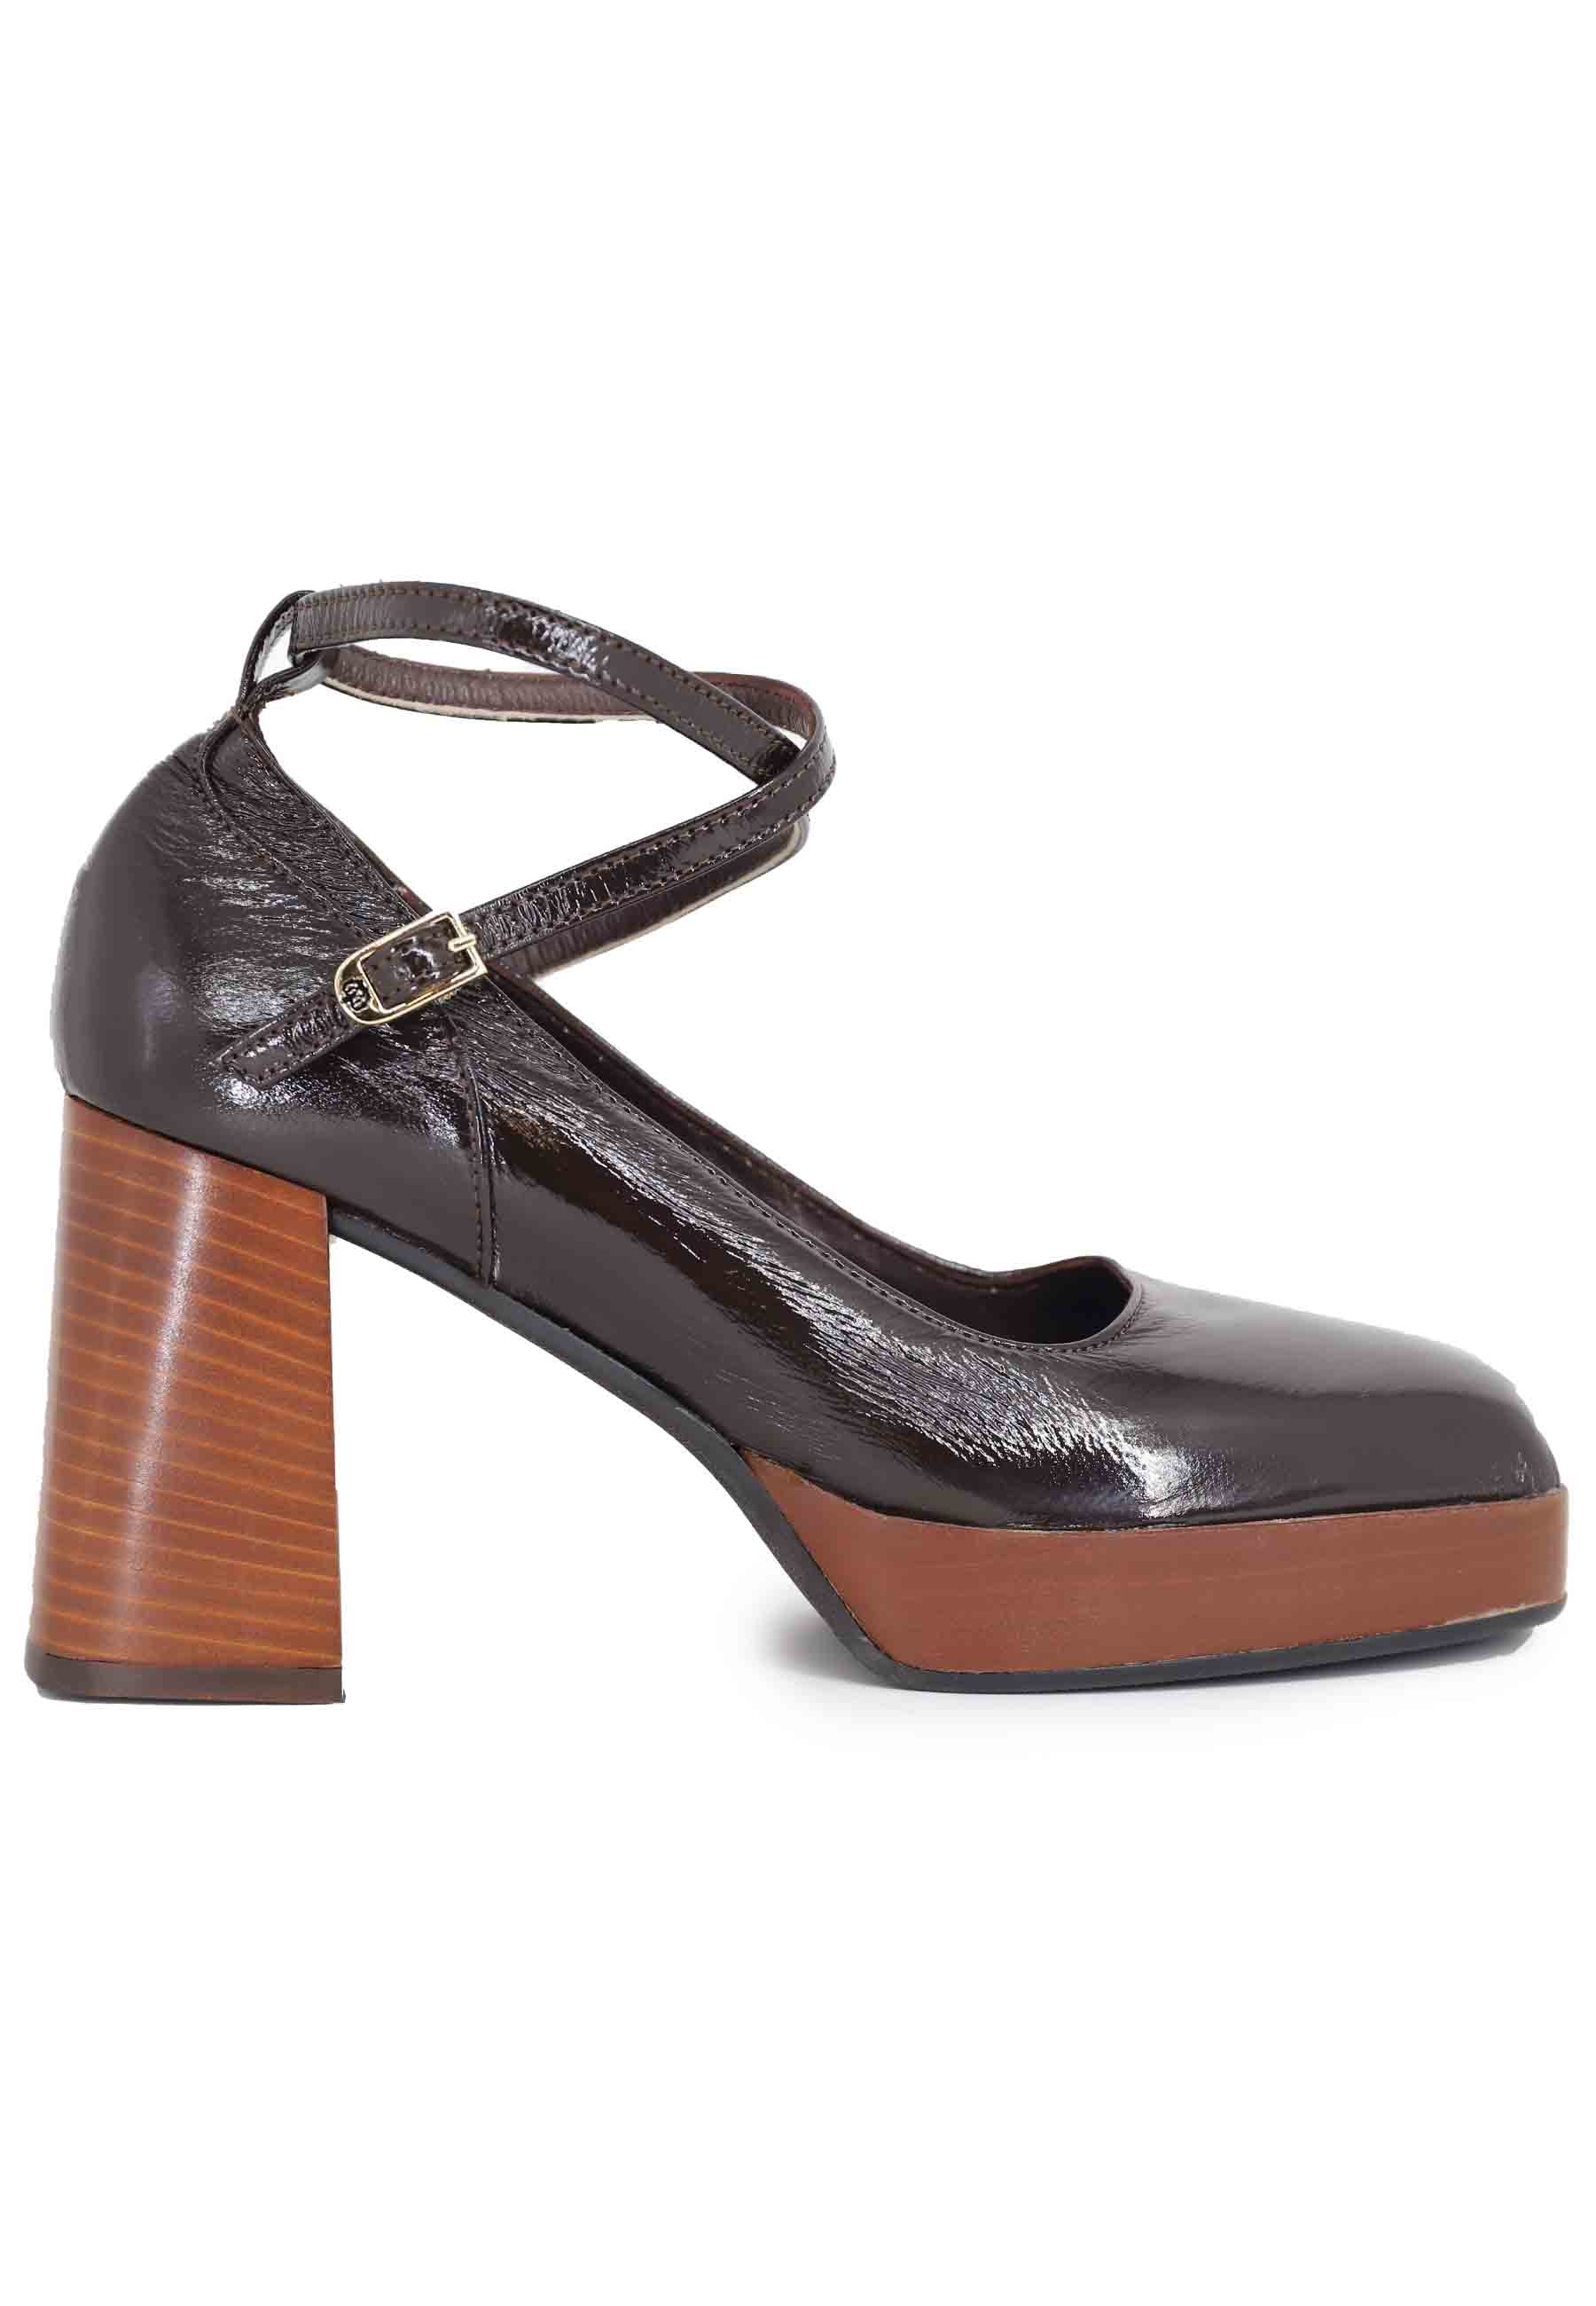 Women's decollete in dark brown leather with straps and high heel